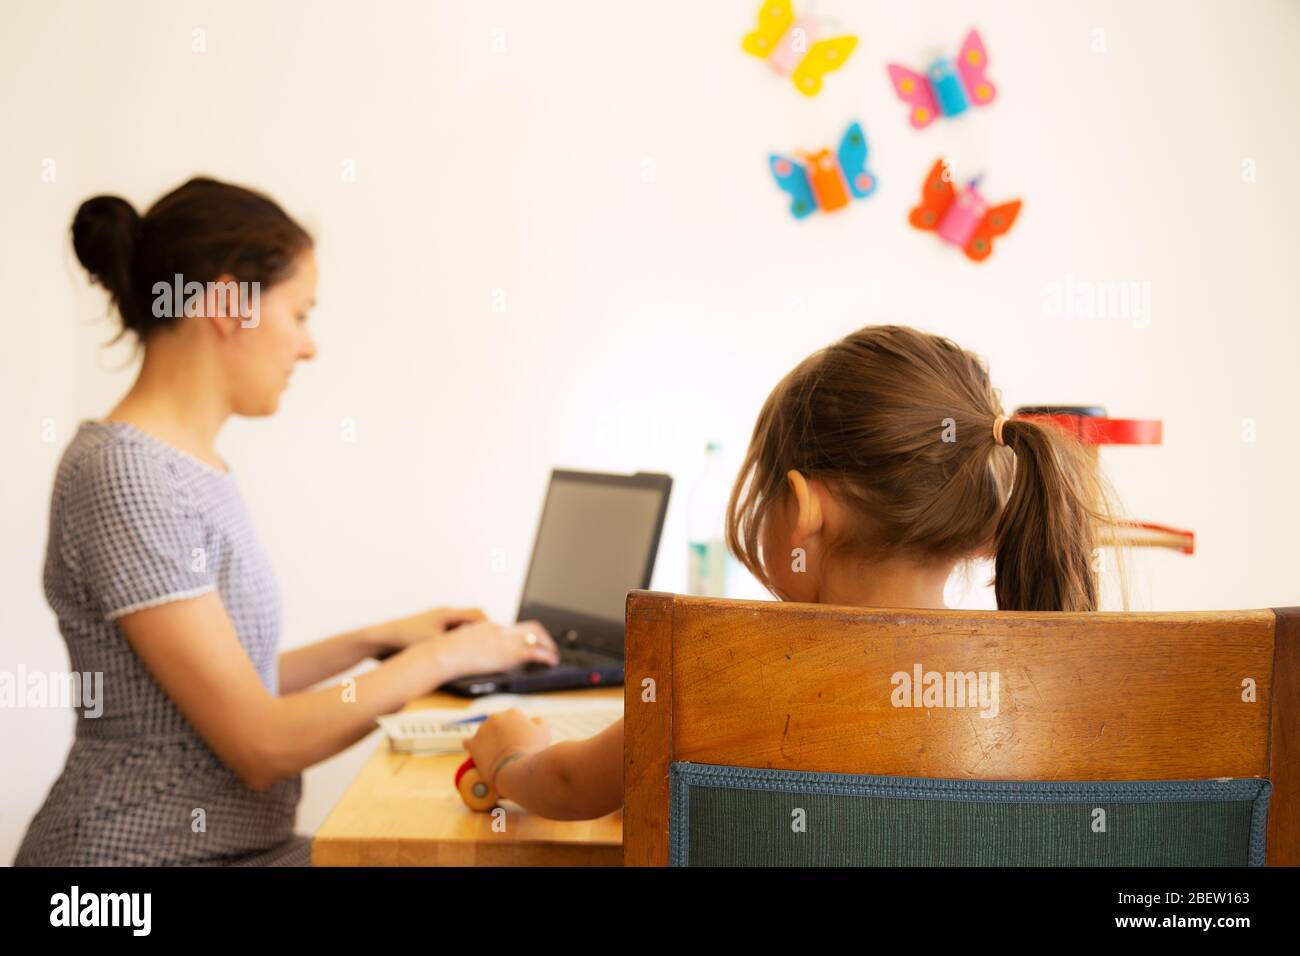 Businesswoman working in homeoffice with her daughter playing next to her during Covid-19 shutdown Stock Photo